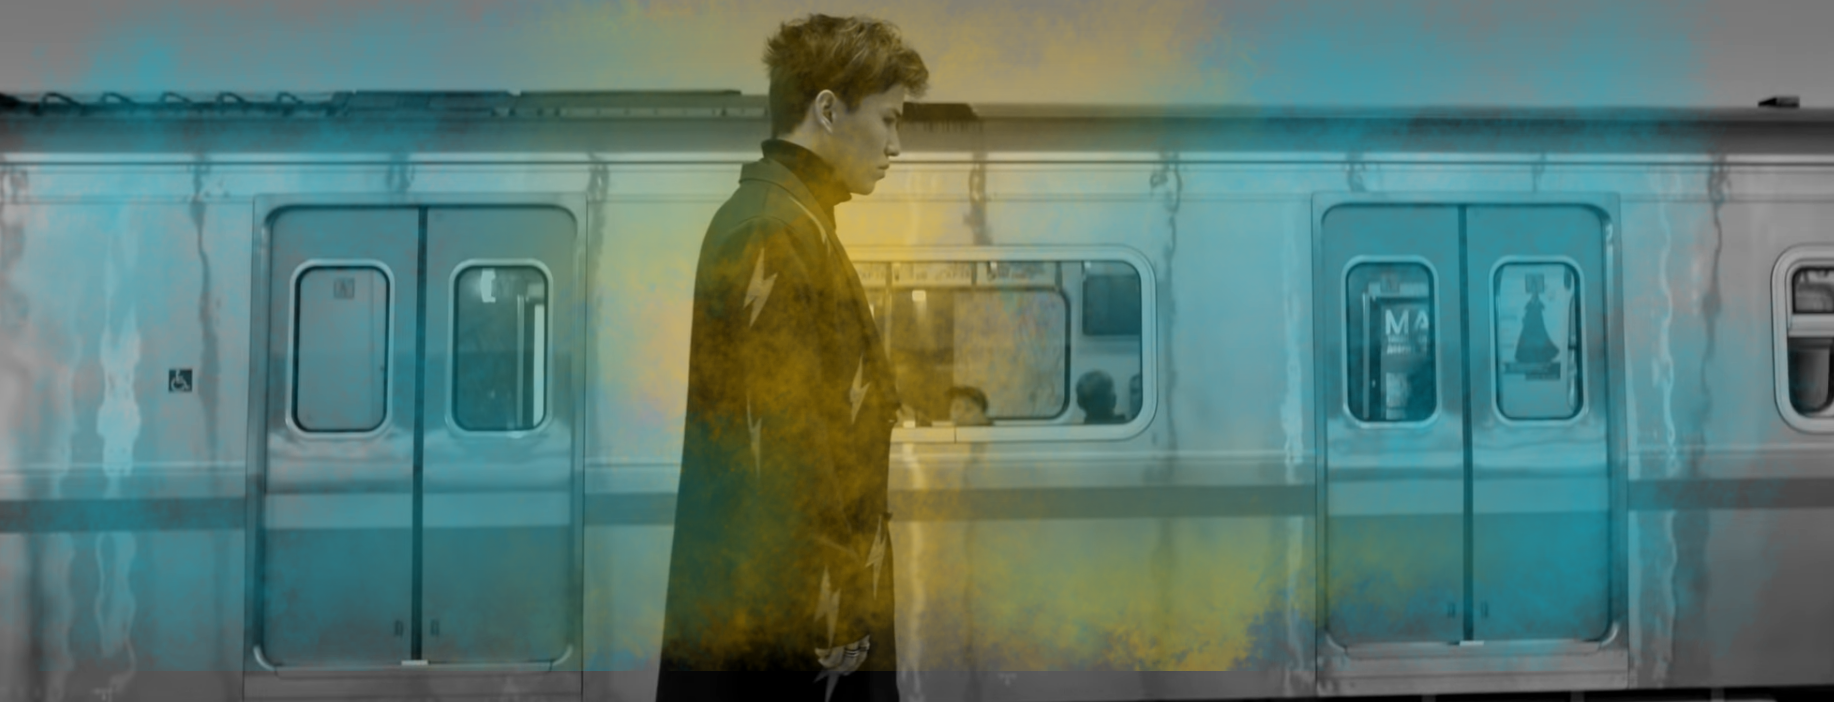 Image of Alem standing in front of a subway train in the “Kaytadan” video